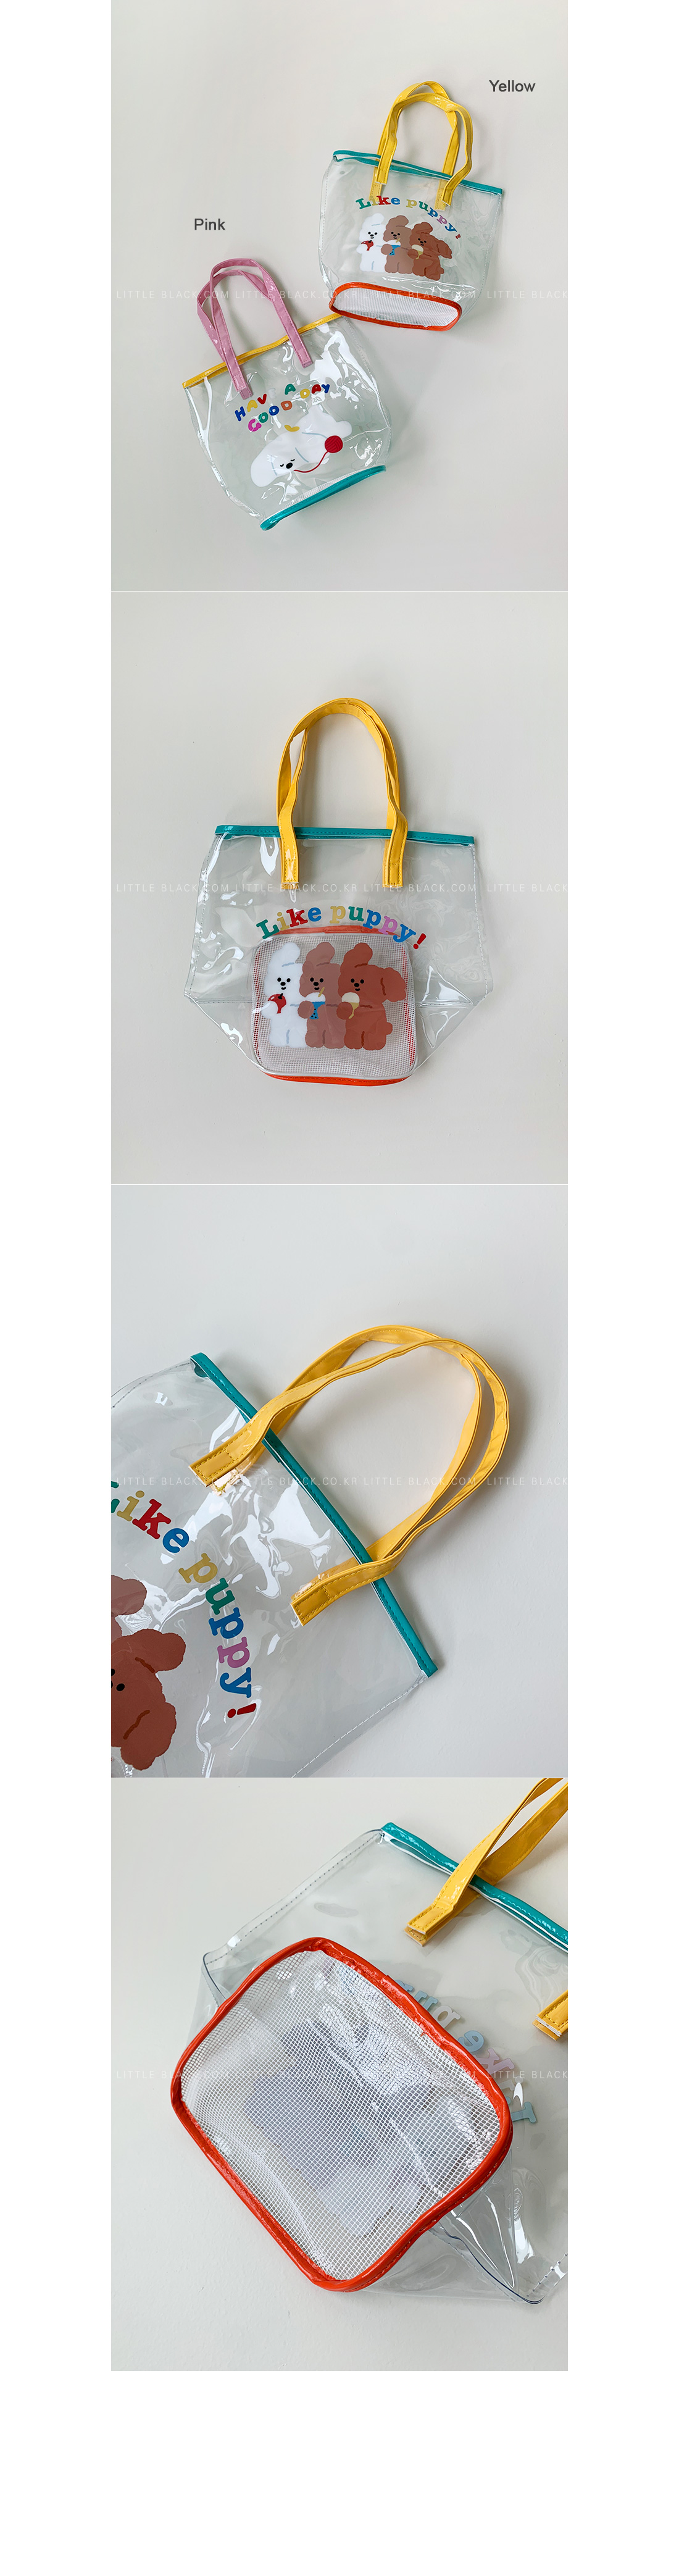 Colorful Graphic Print Clear PVC Bag|